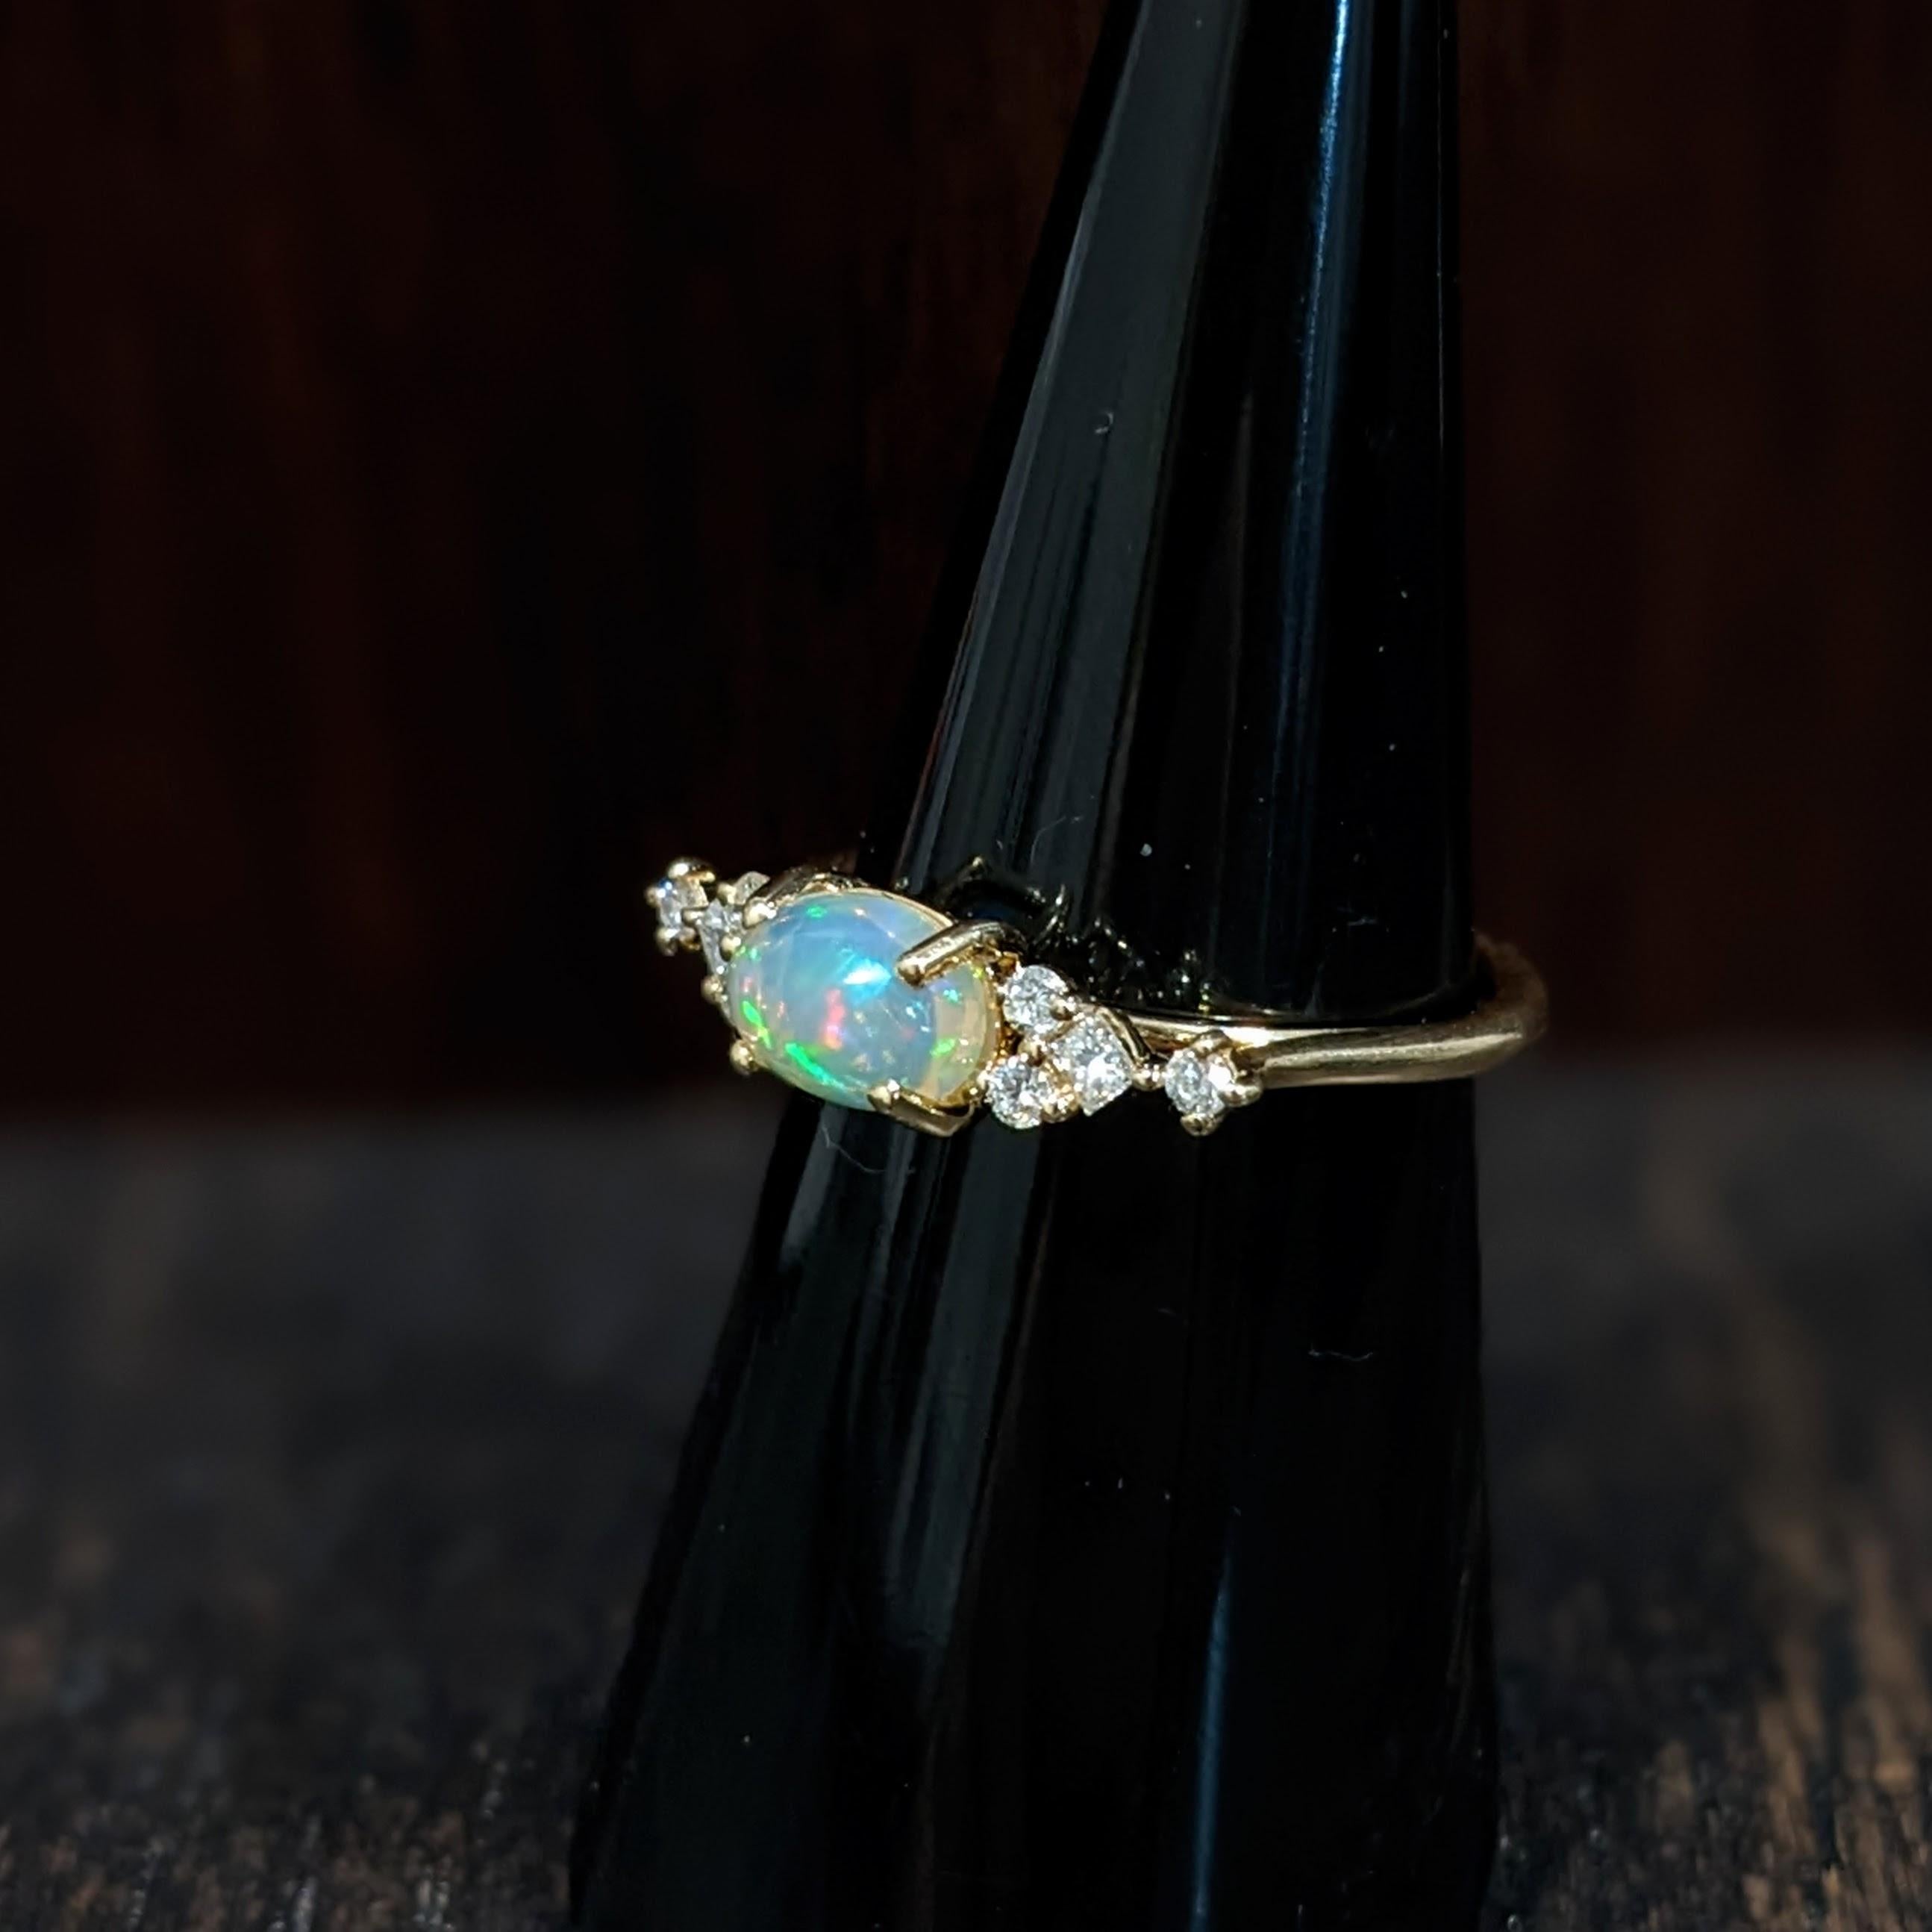 This lovely opal has all the colors of the rainbow, accented with natural earth mined diamond accents. This oval ring is perfect for the modern bride or that special someone in your life! This opal ring also makes a beautiful October birthstone gift